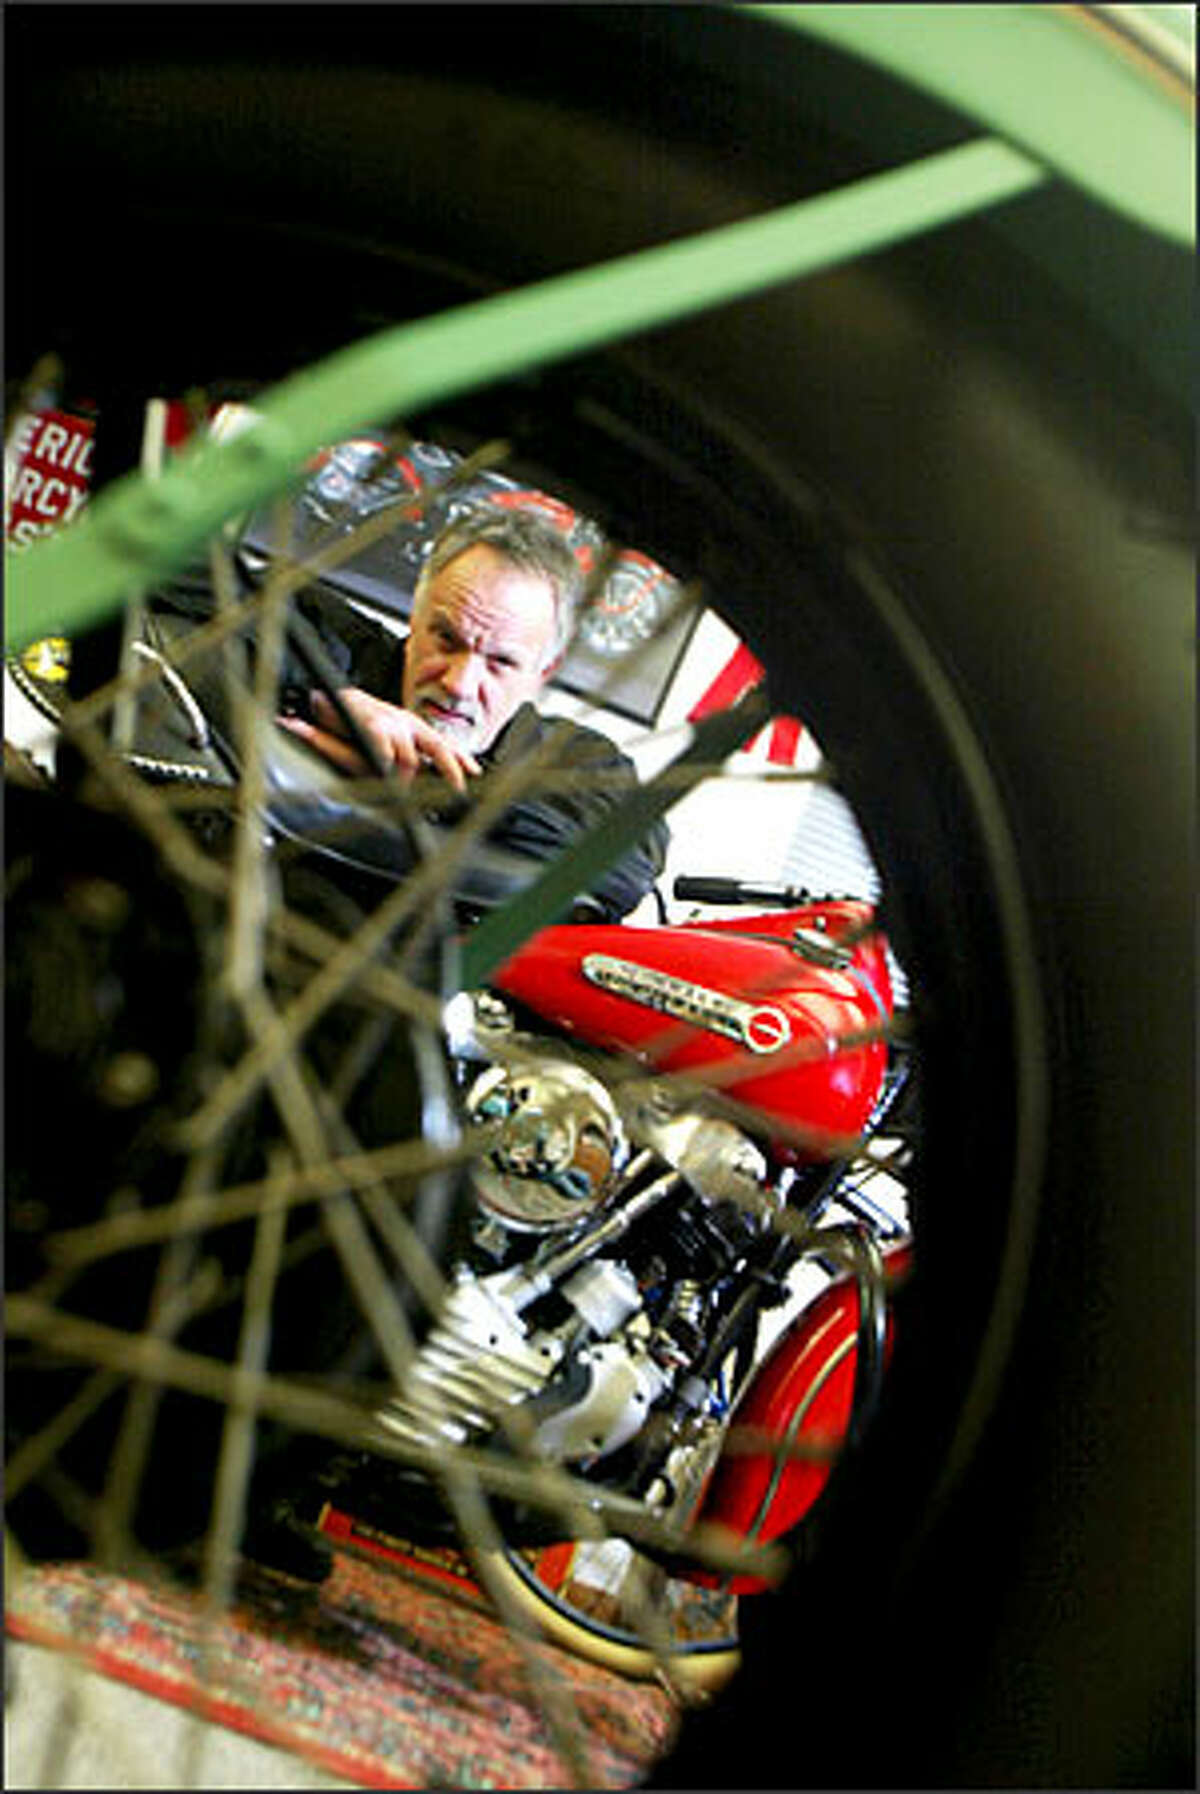 Marty Maloney leans on a 1947 Harley Davidson "knucklehead" as he looks through the wheel of a 1938 Harley Davidson UL.